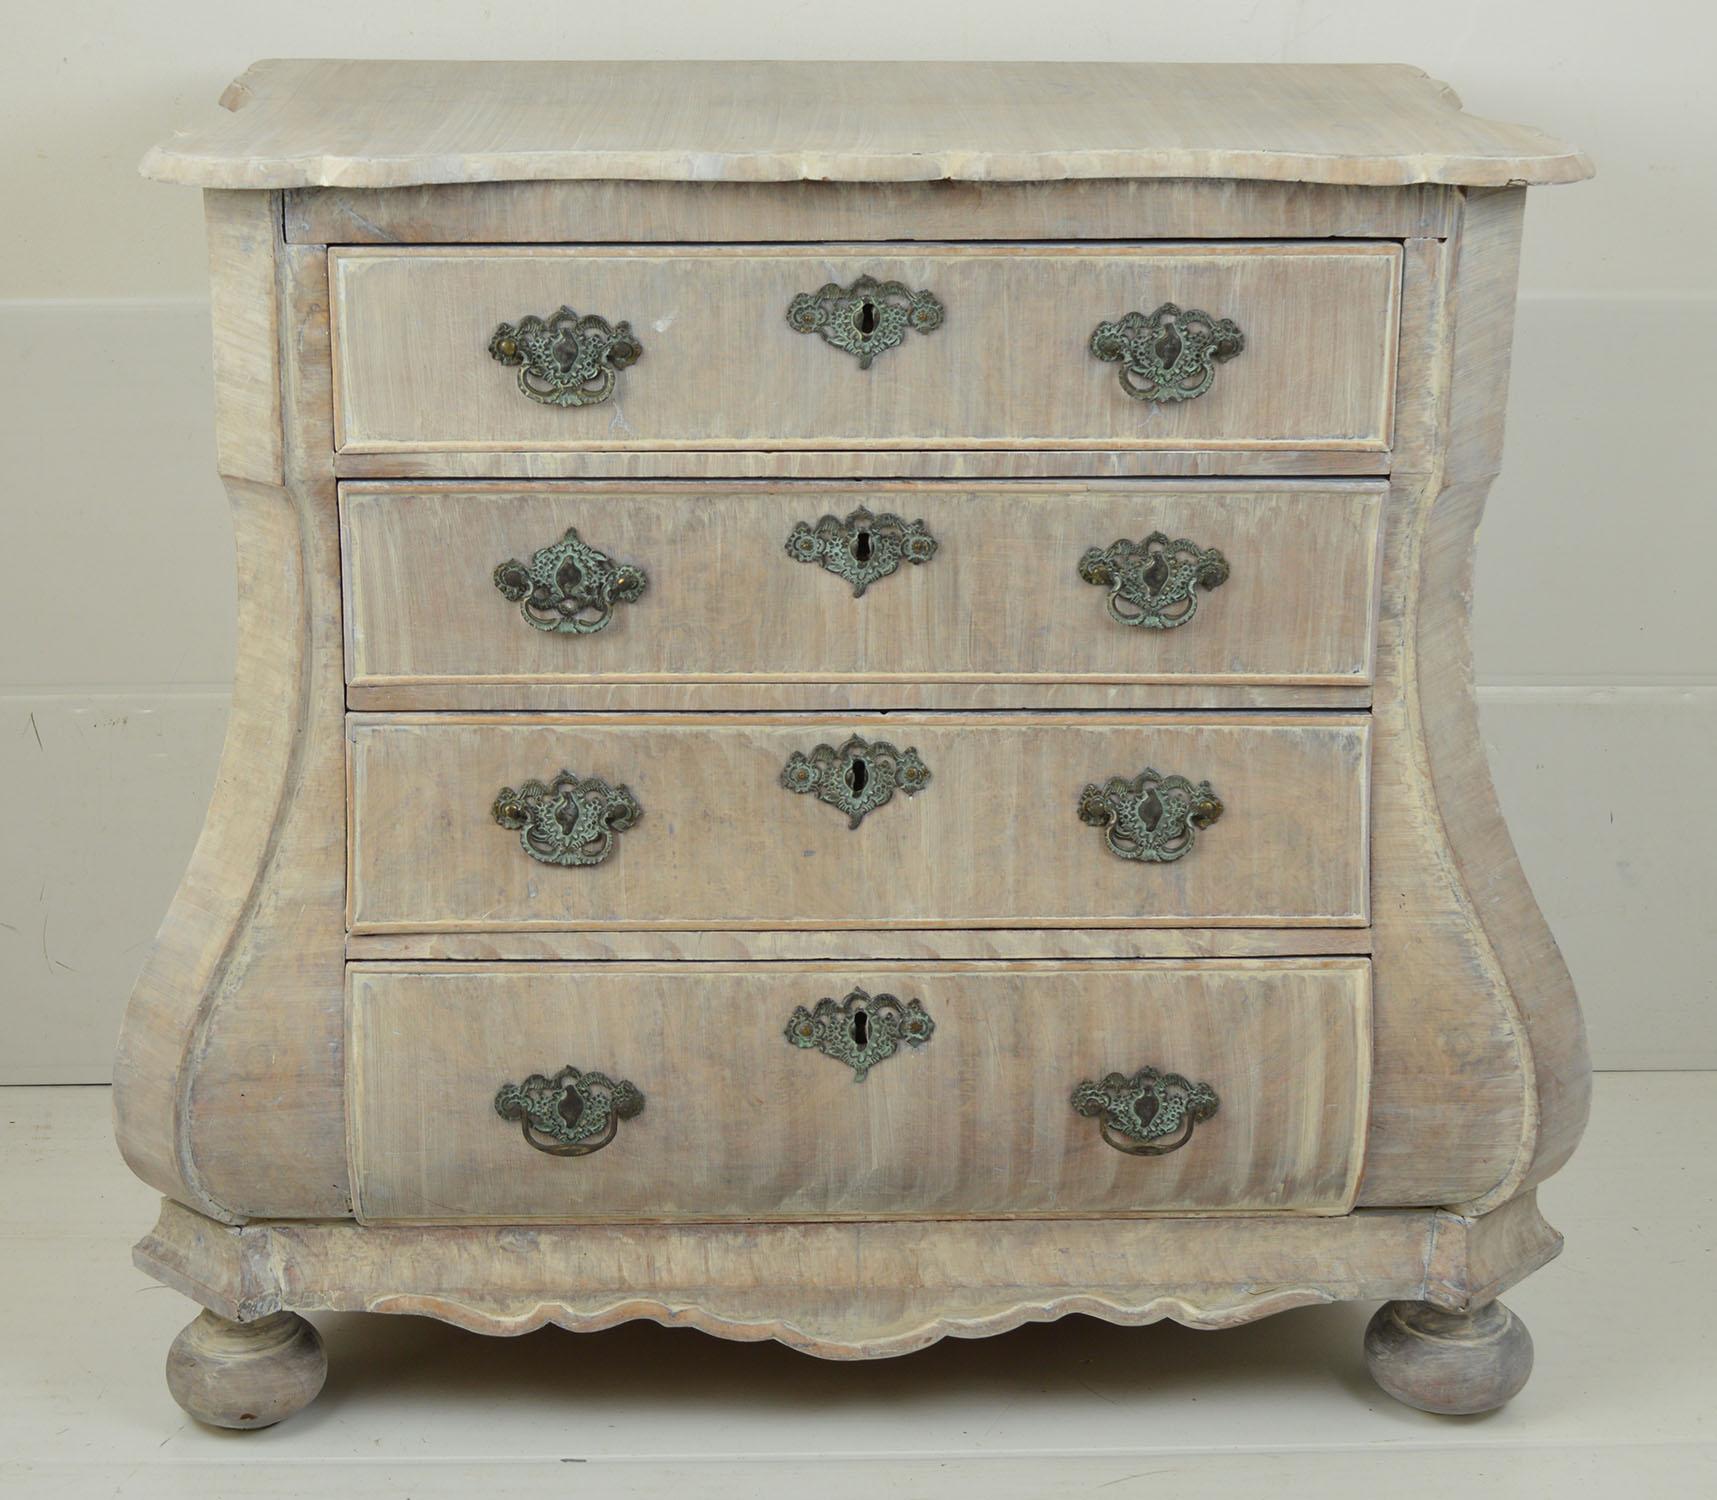 Wonderful Dutch Baroque style commode or chest of drawers.

Small proportions.

Burl walnut veneer on an oak carcase.

The piece has been recently limed to enhance the beautiful grain in the wood.

Original feet and hardware.

Please note